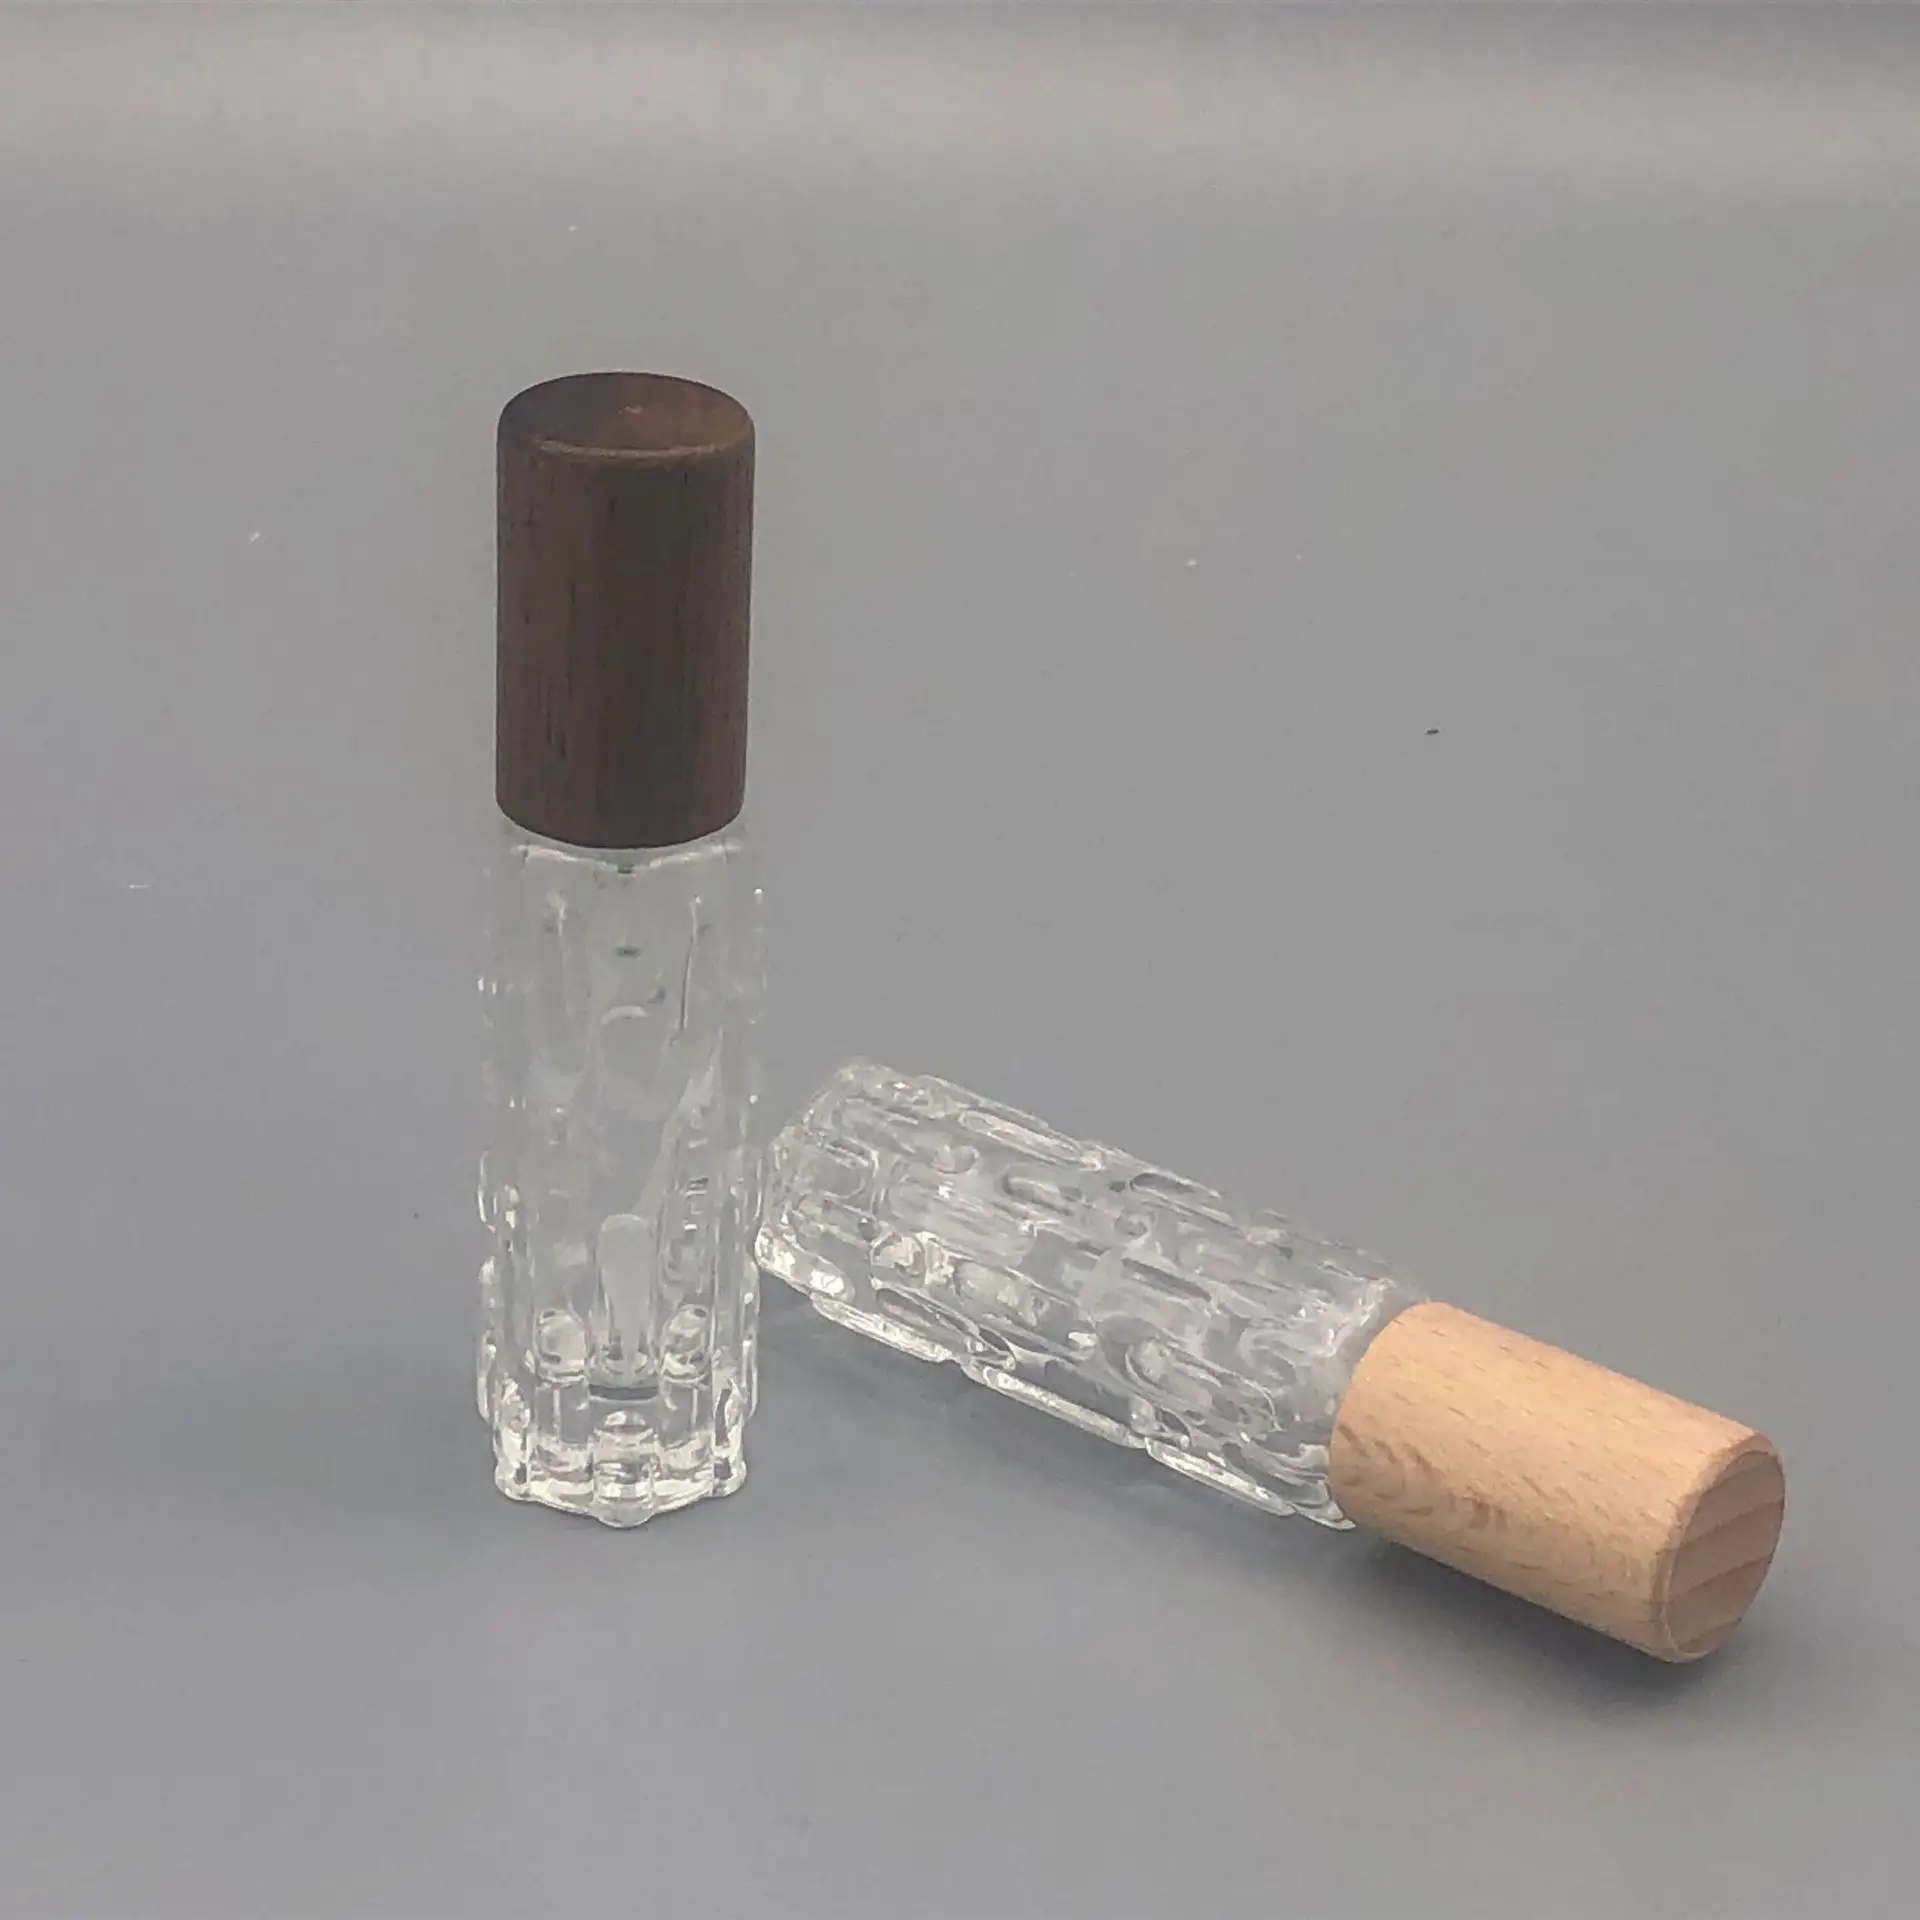 Wholesale Cosmetic Spray Bottles Real Wooden Cover Unique Bitter Gourd Bottle High Quality 10ml Clear Perfume Glass Bottles